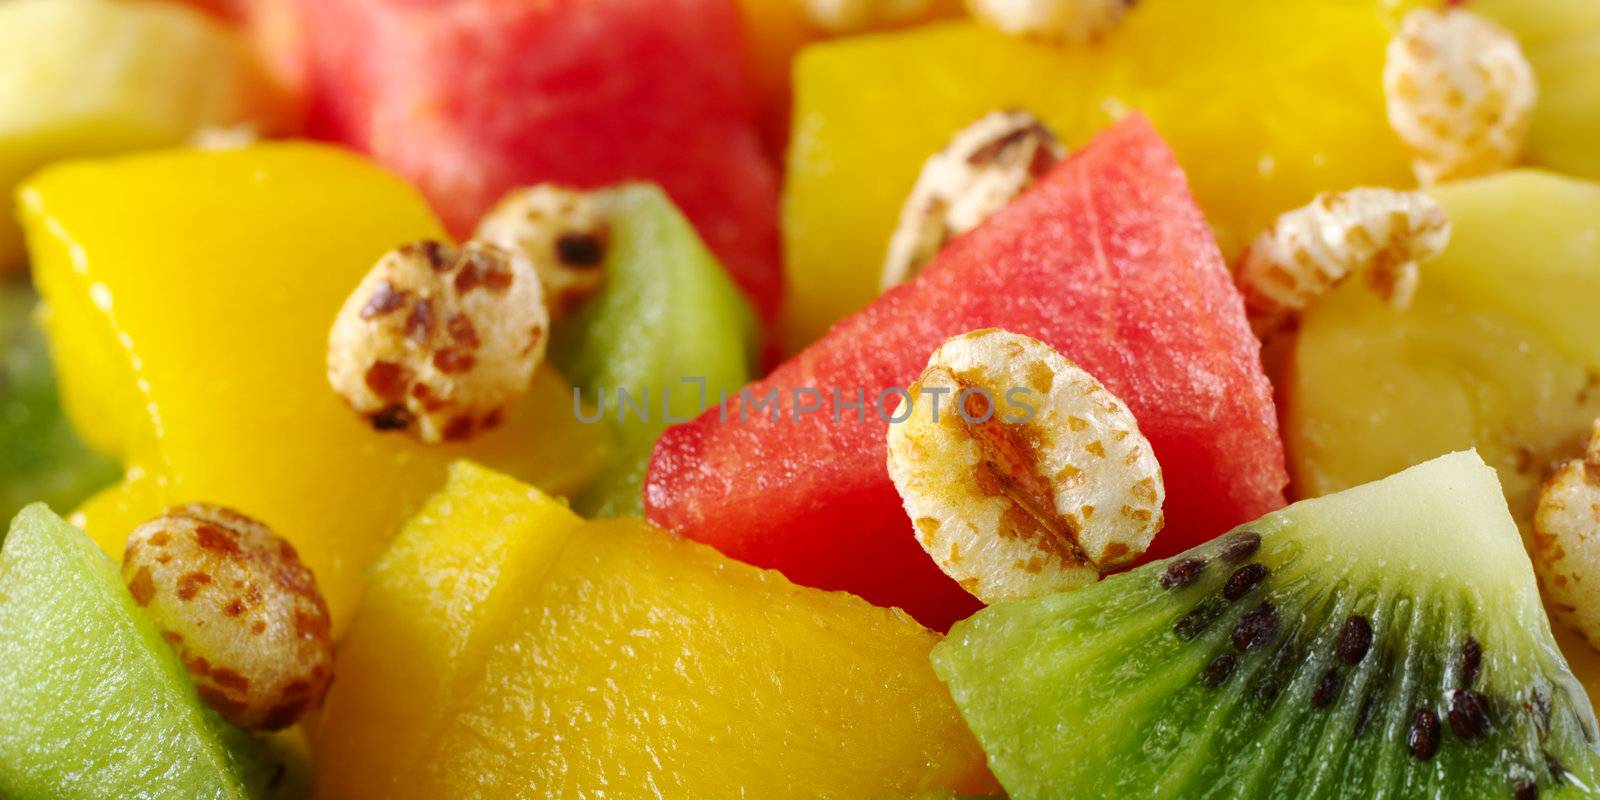 Sweetened puffed wheat cereal on fresh and healthy fruit salad containing kiwi, watermelon, mango and banana (Selective Focus, Focus on the puffed cereal on the top of the kiwi)